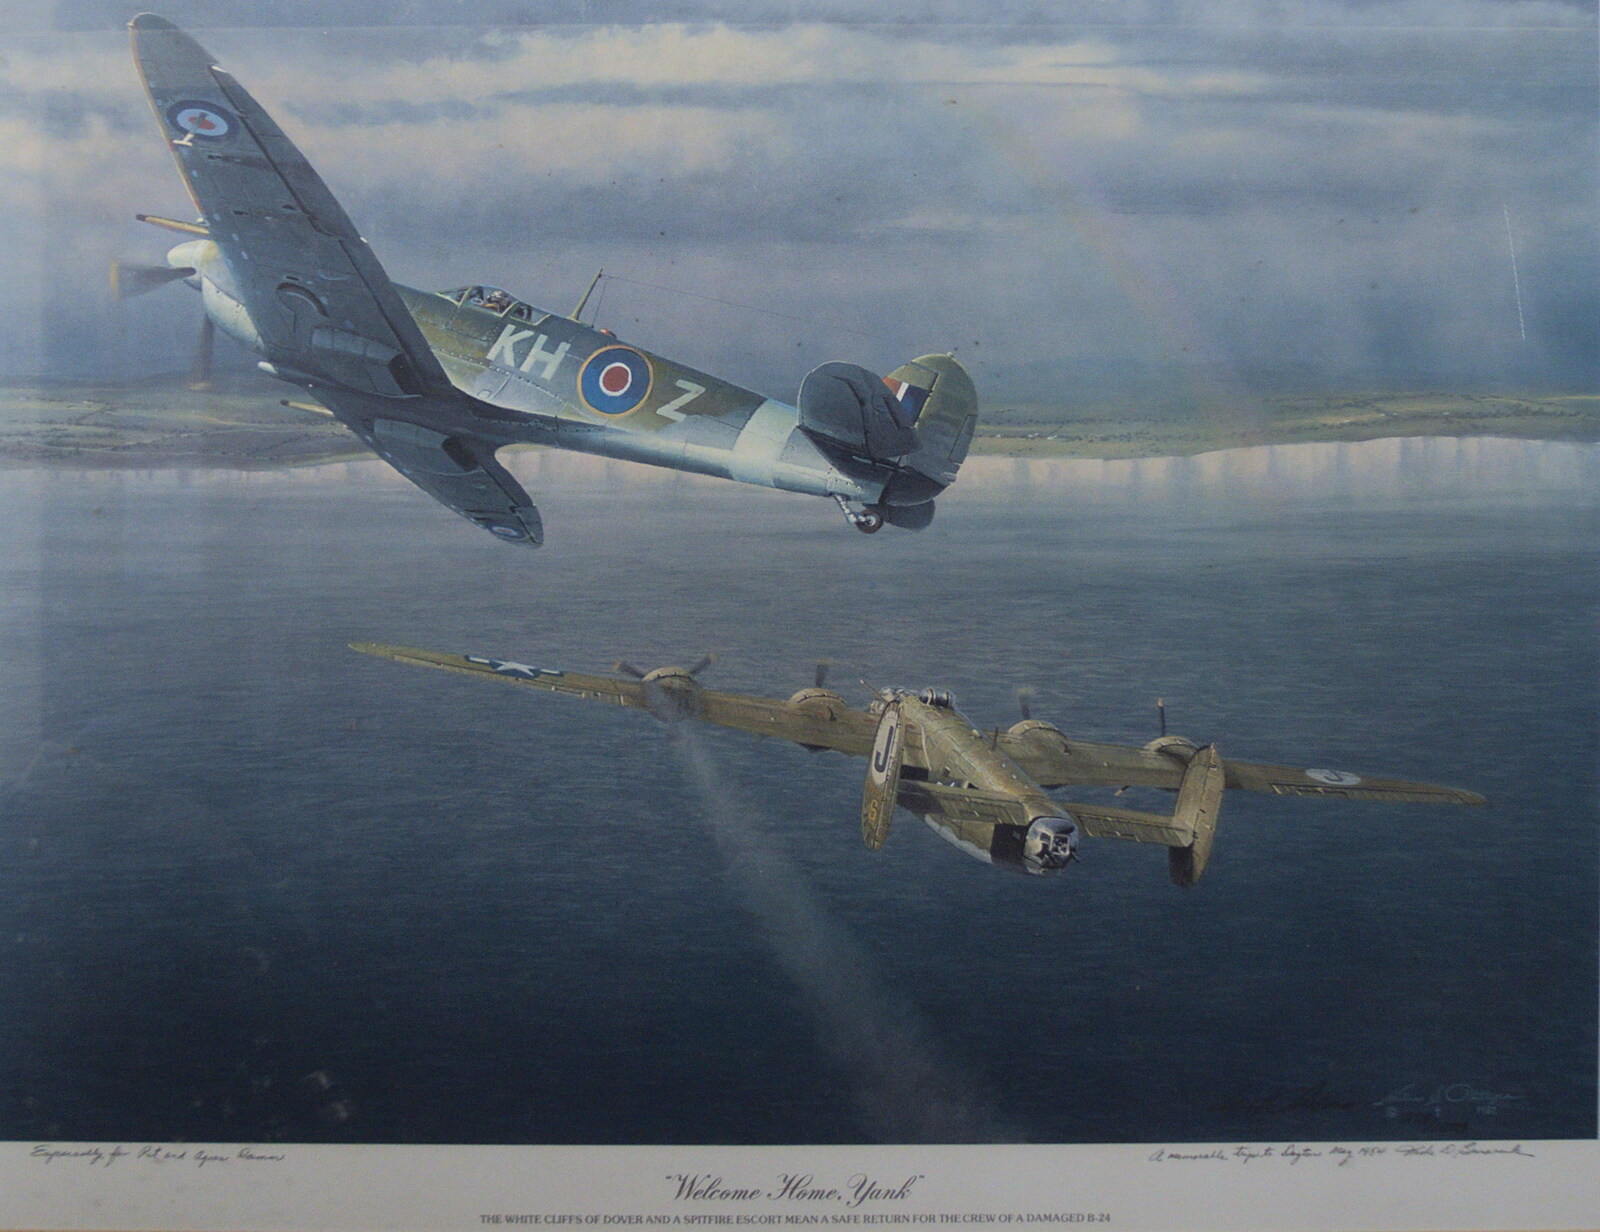 A painting of a Spitfire escorting a B24 Liberator from A Trip to Old Buckenham Airfield, Norfolk - 6th August 2022